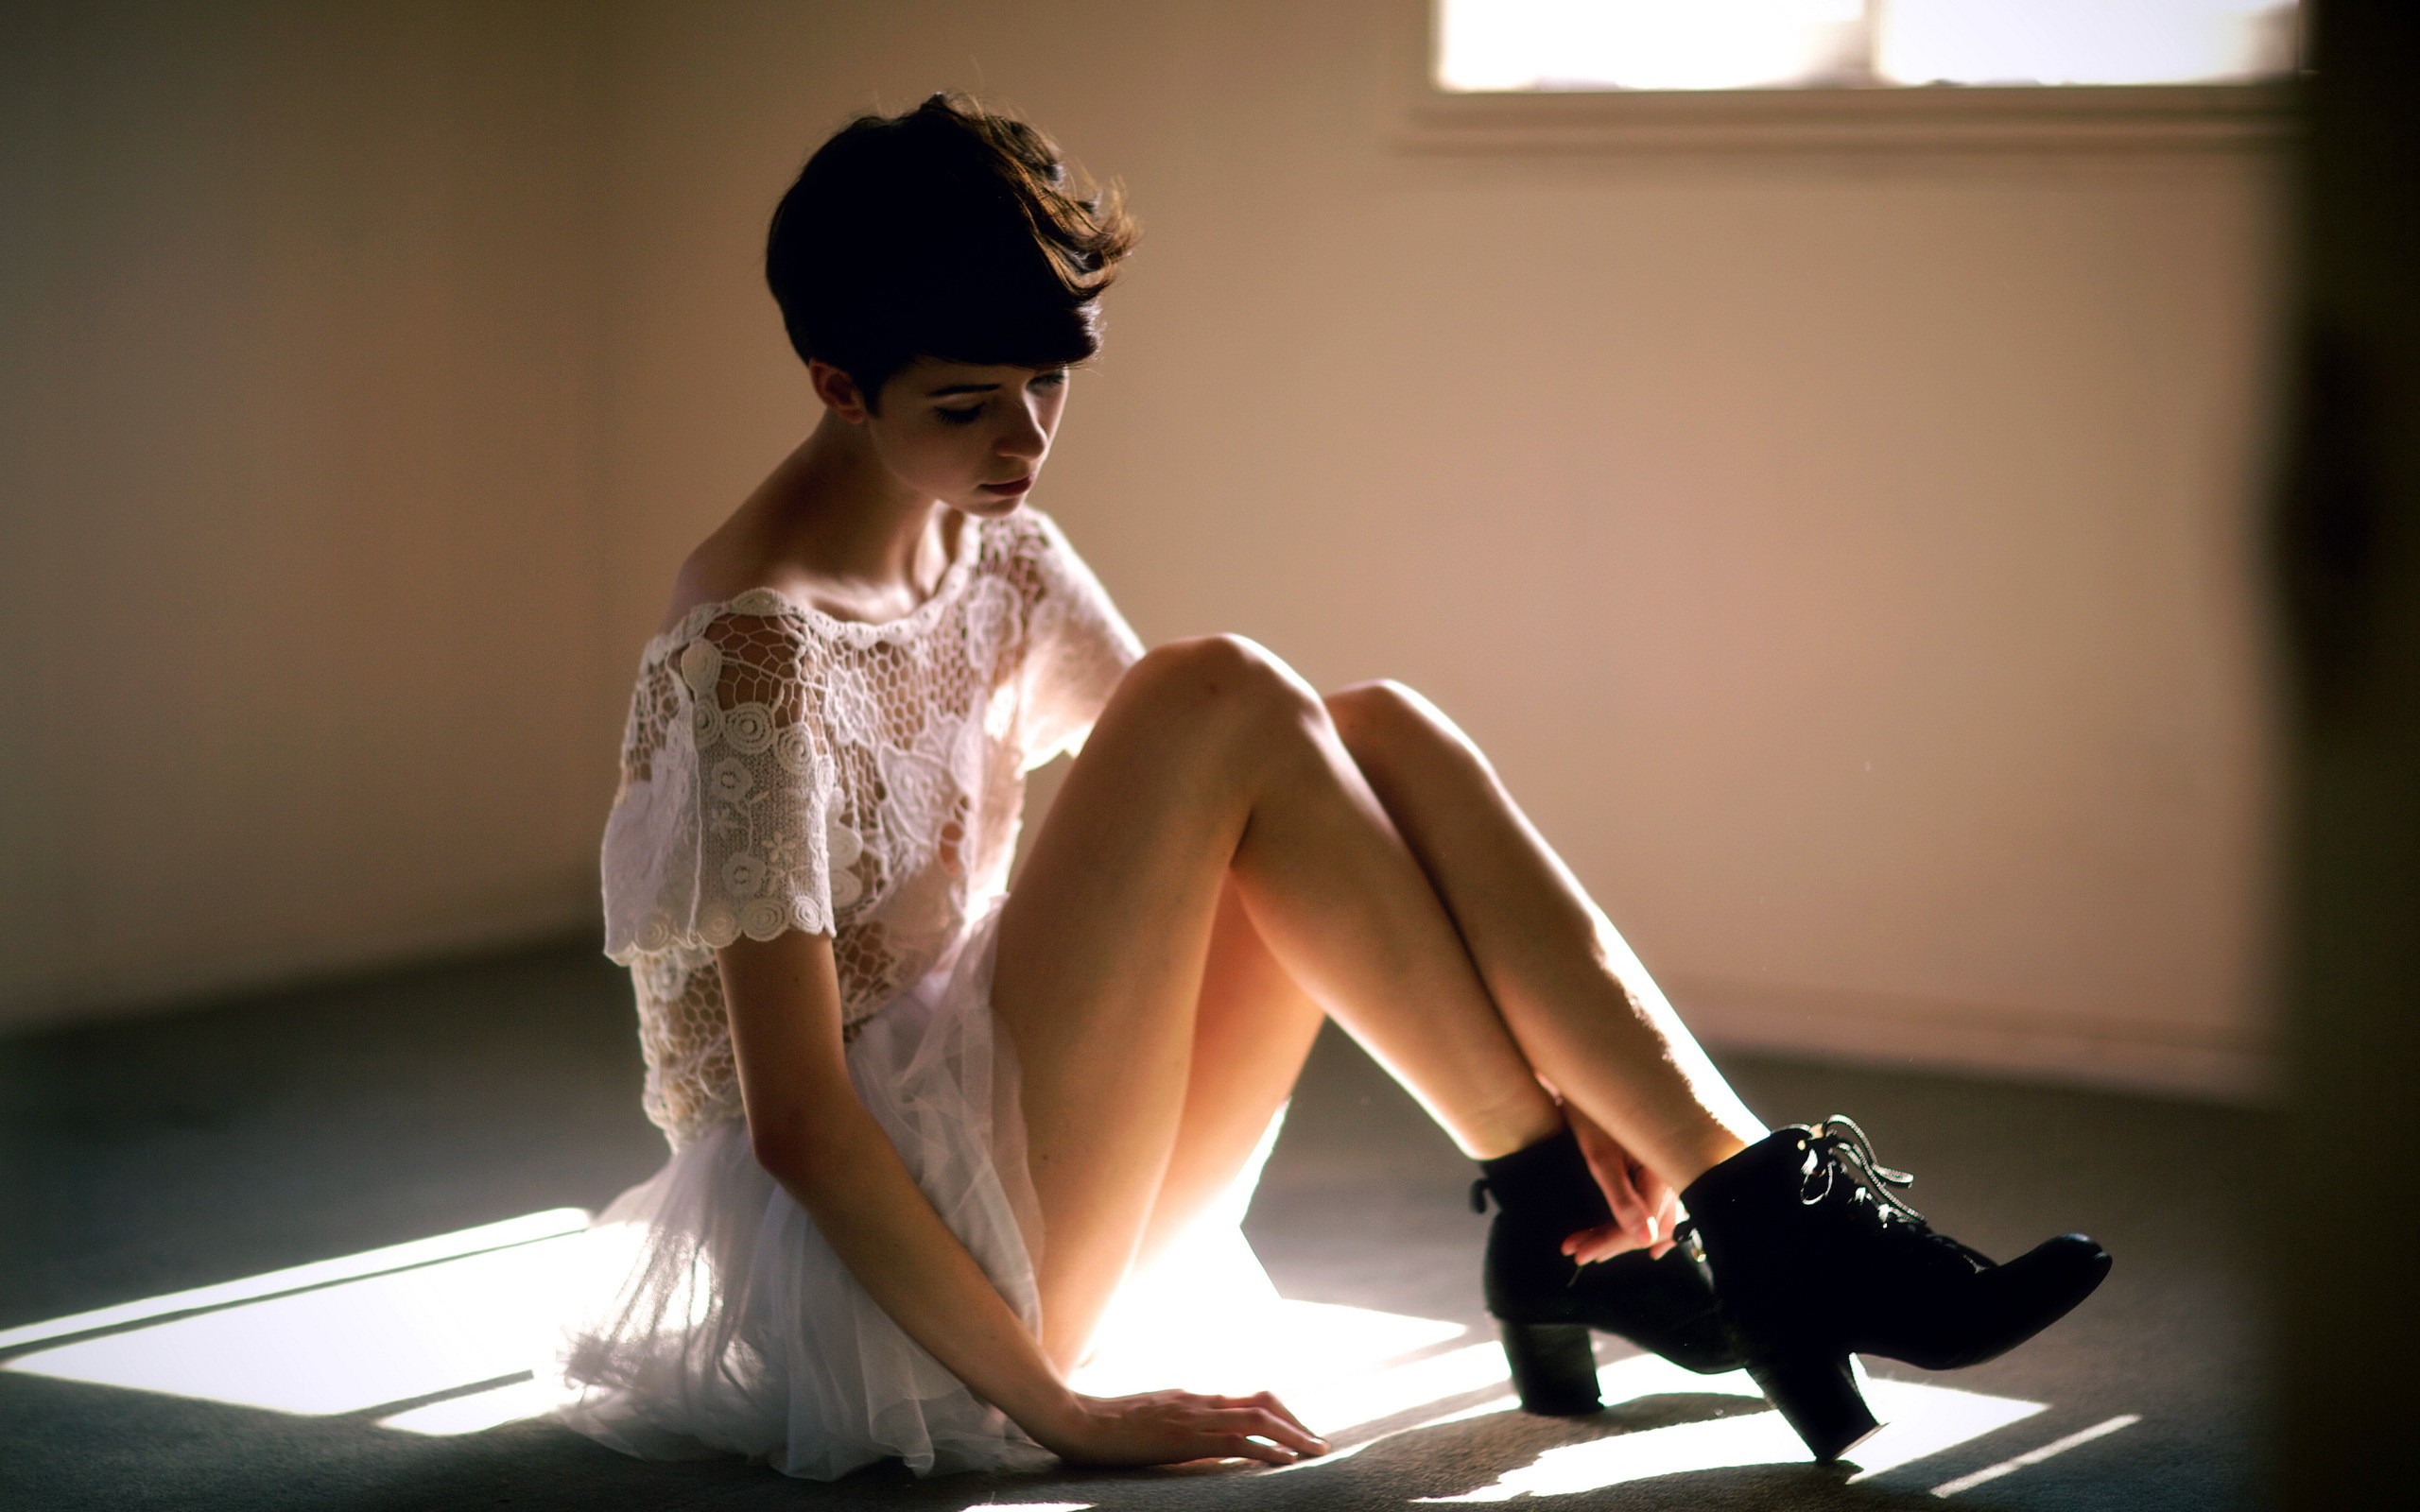 People 2560x1600 women short hair boots see-through clothing model sitting legs looking away white dress dress white clothing women indoors on the floor